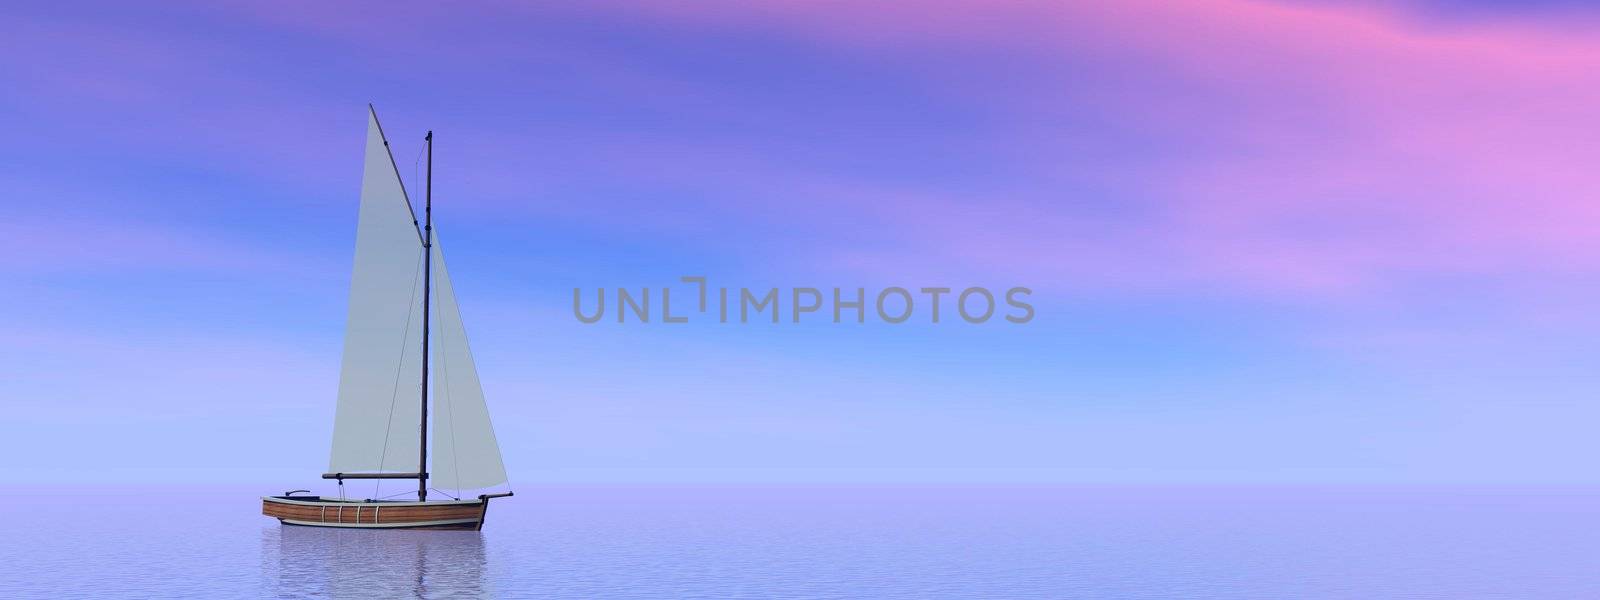 Small sailboat on the ocean by sunset